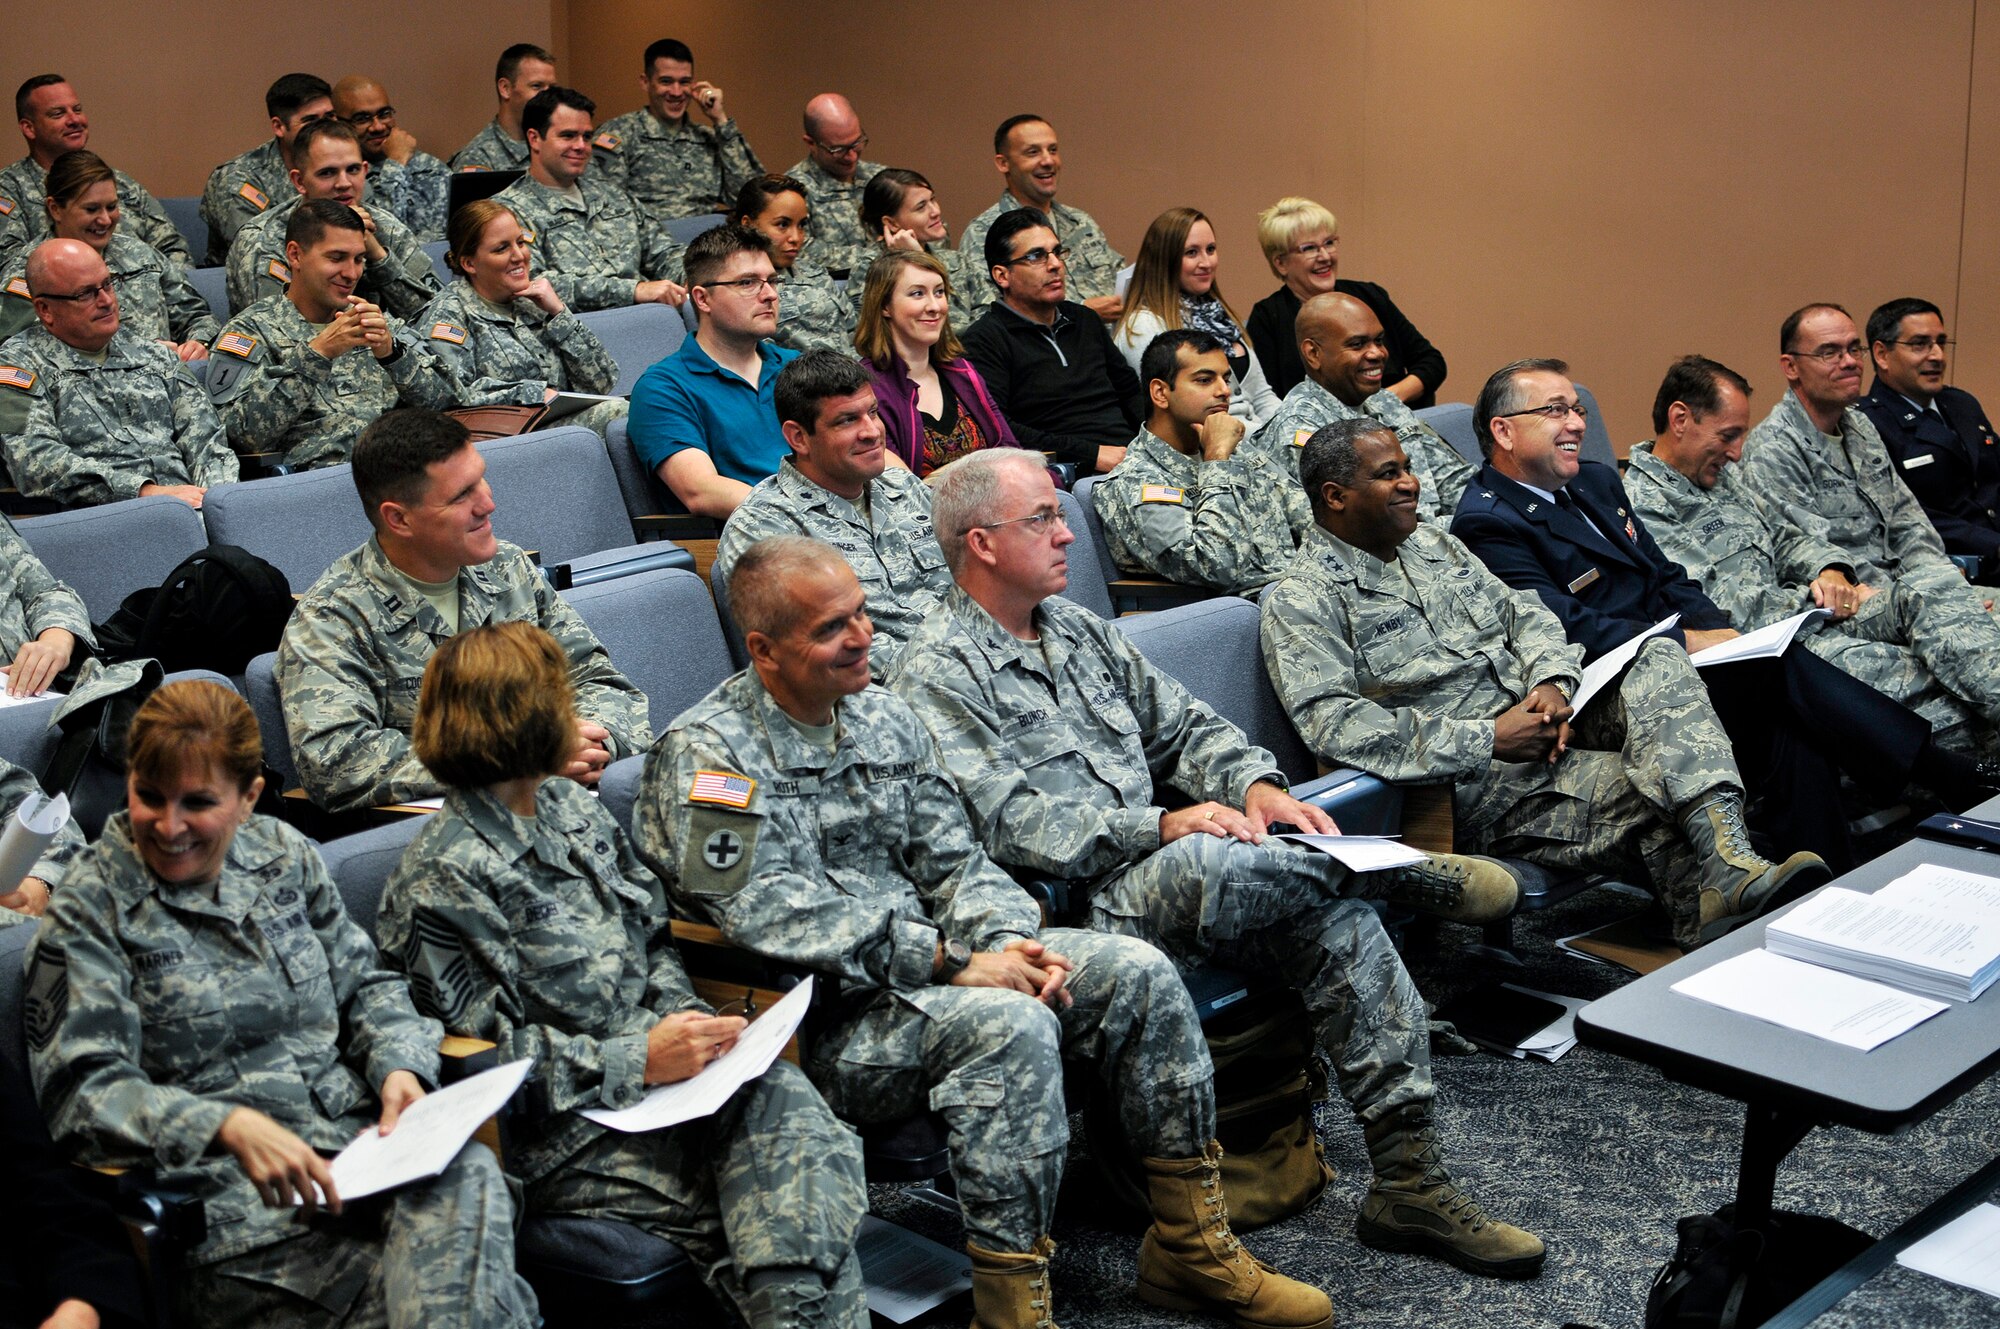 Soldiers and Airmen with the Judge Advocate General Corps watch a welcome briefing during a joint-force training workshop held at the 182nd Airlift Wing, Peoria, Ill., Sept. 12, 2015. The JAG Corps provides professional counsel and a full spectrum of legal capabilities to service members. (U.S. Air National Guard photo by Staff Sgt. Lealan Buehrer/Released)